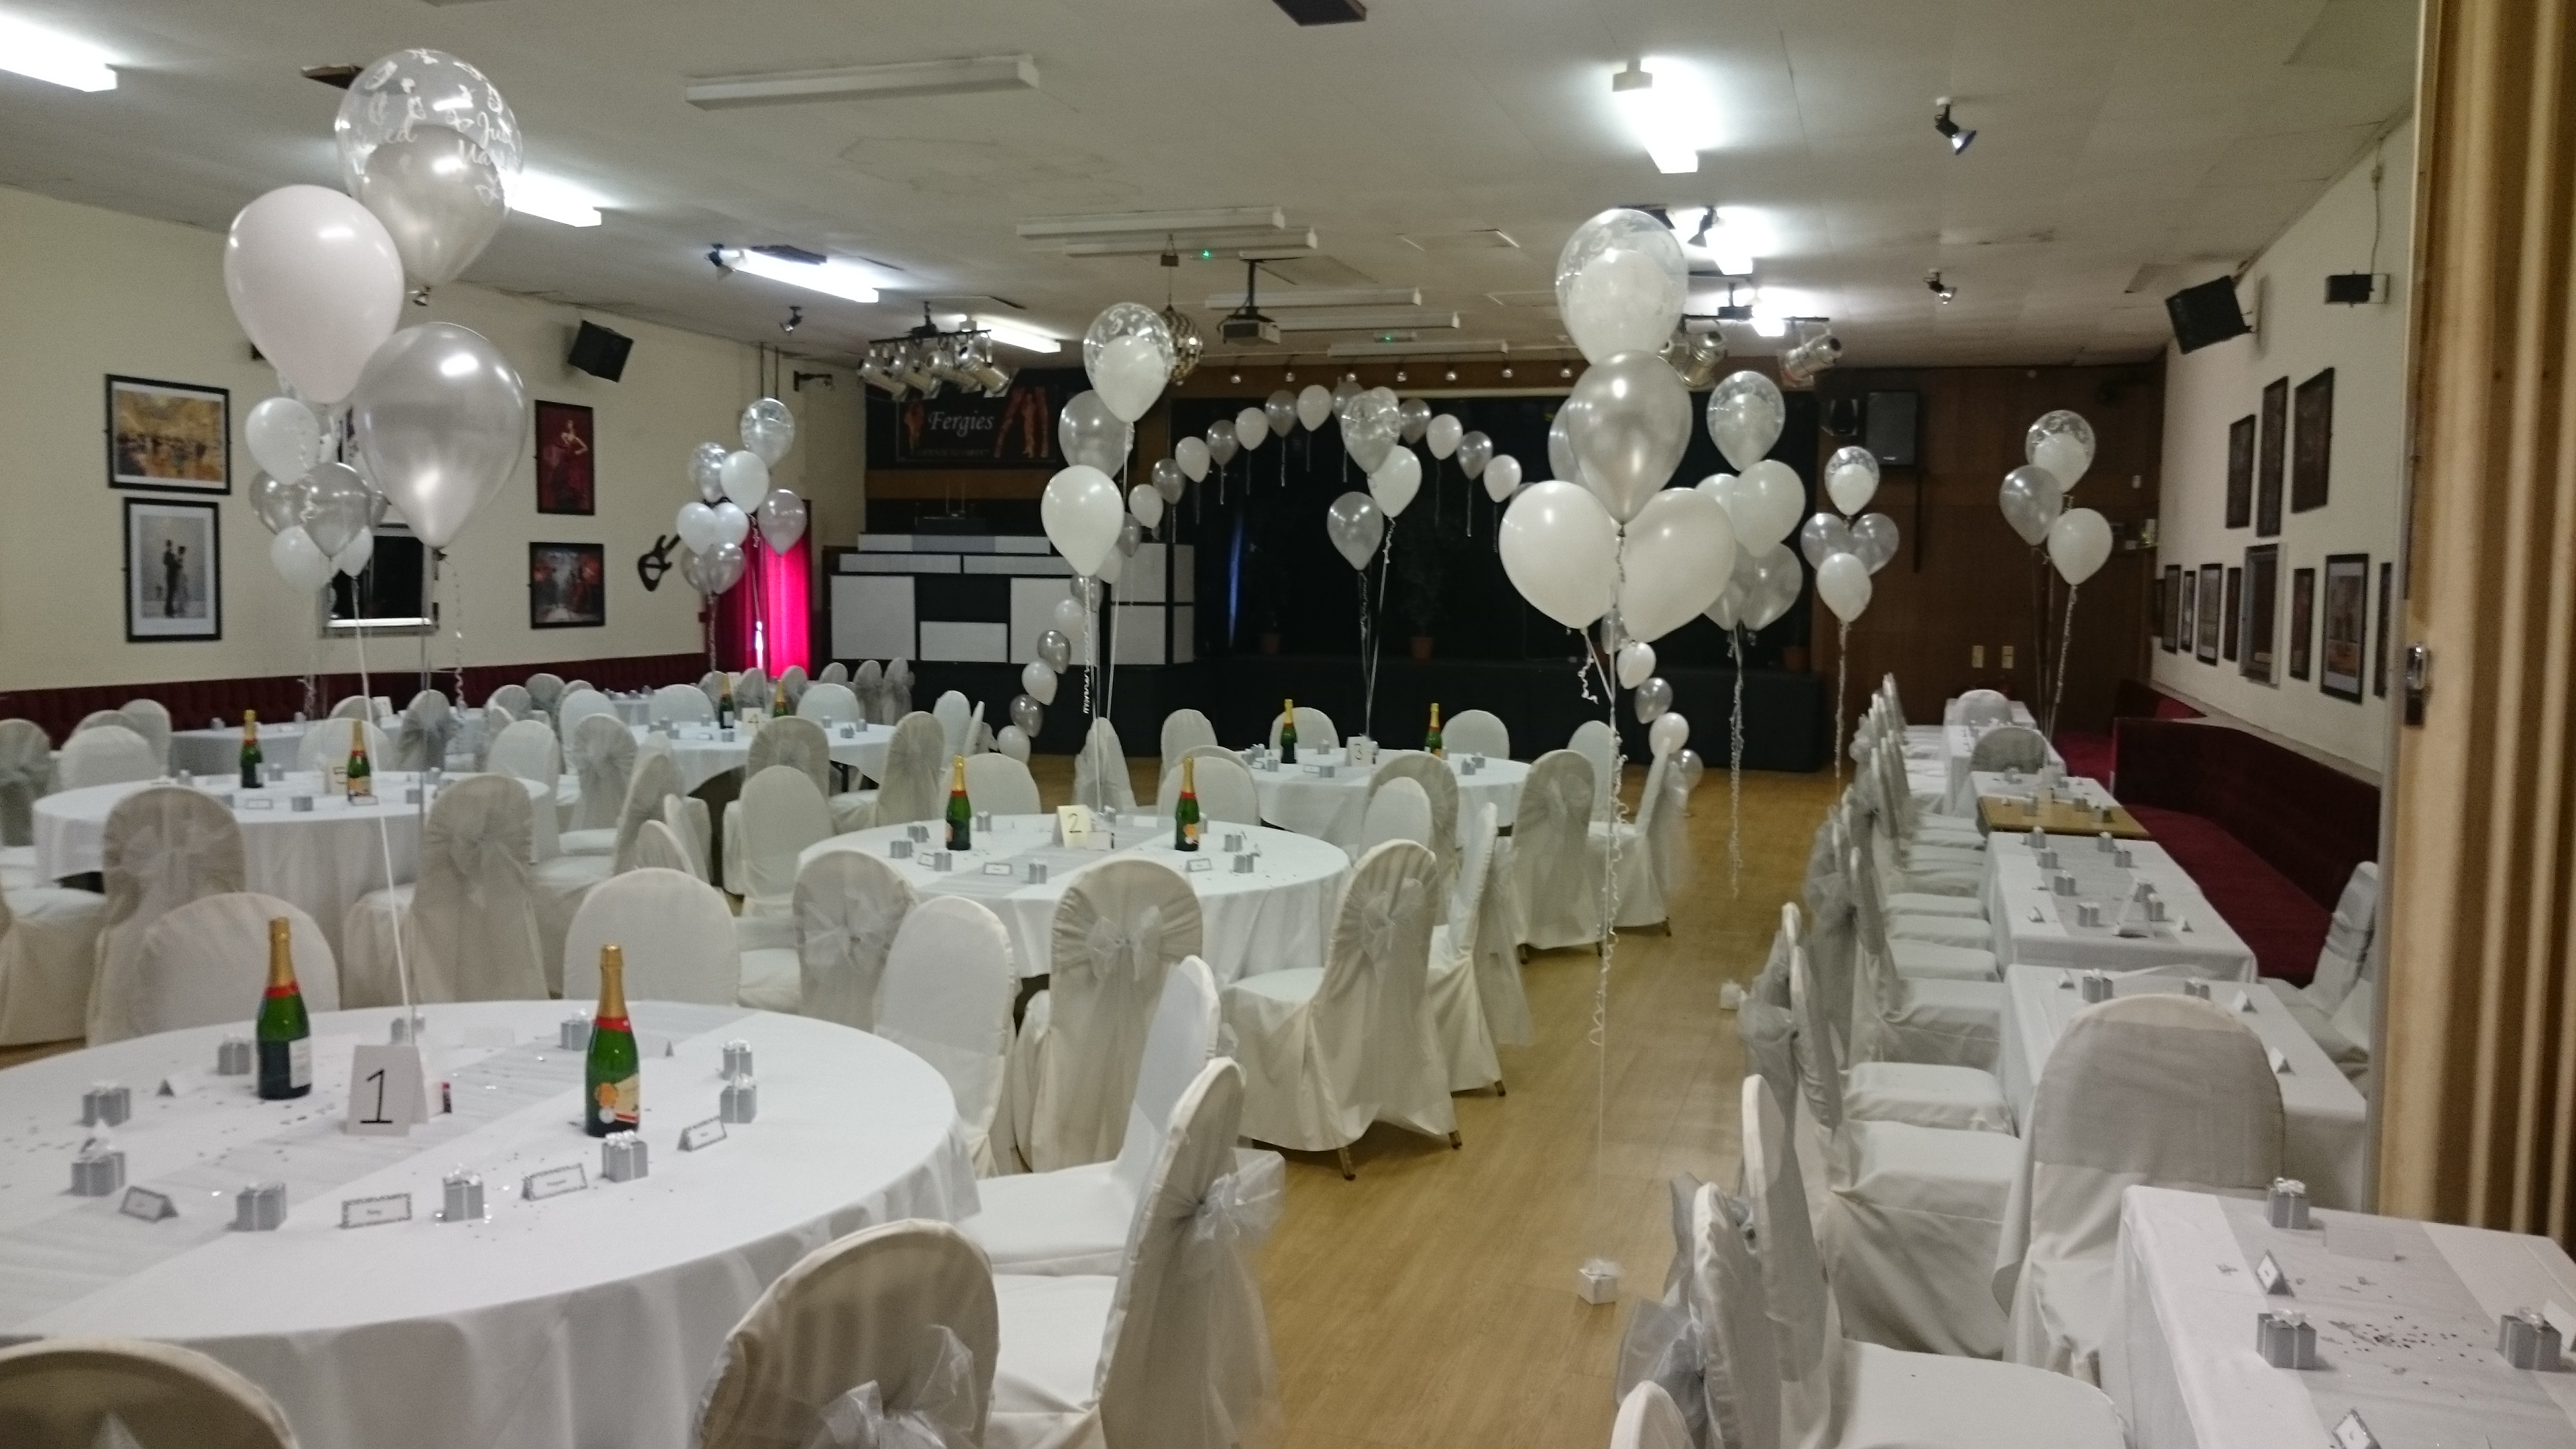 You are currently viewing Wedding Reception at the Massey Ferguson Club Coventry. The use of arches, clouds and bouquets in a neutral colour worked really well.